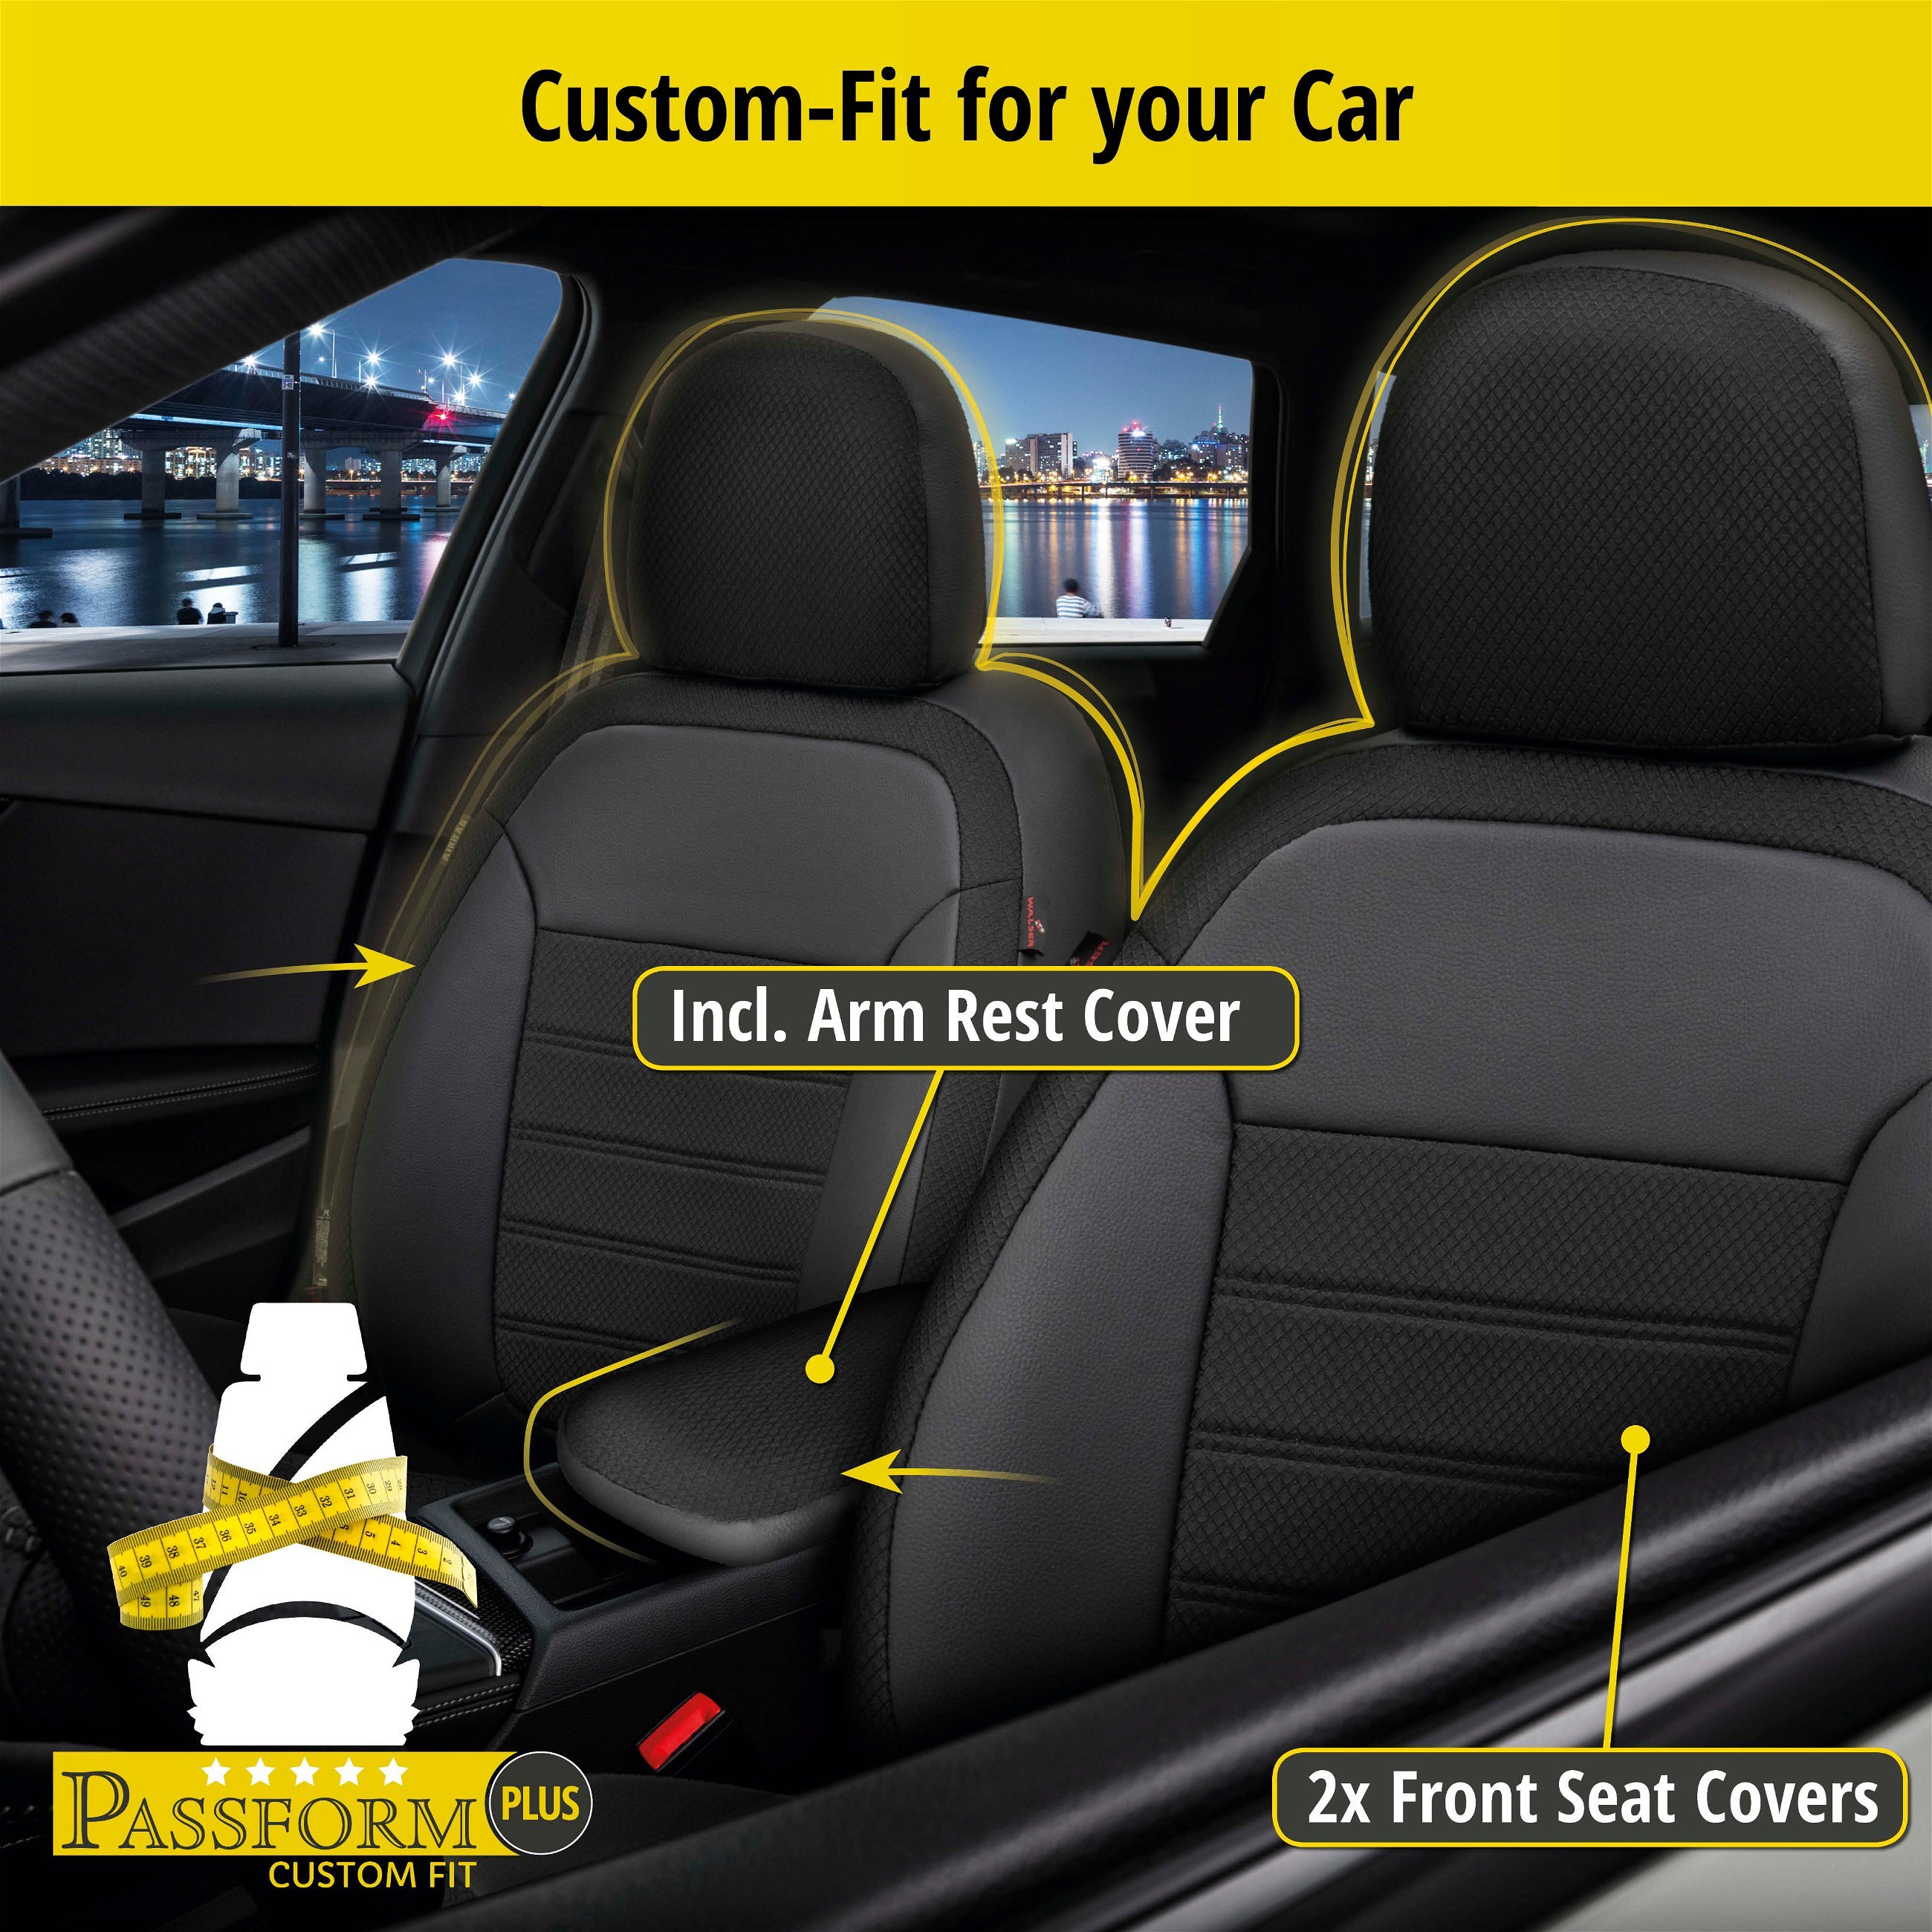 Seat Cover Aversa for VW Caravelle VI 04/2015 -Today, 2 seat covers for normal seats